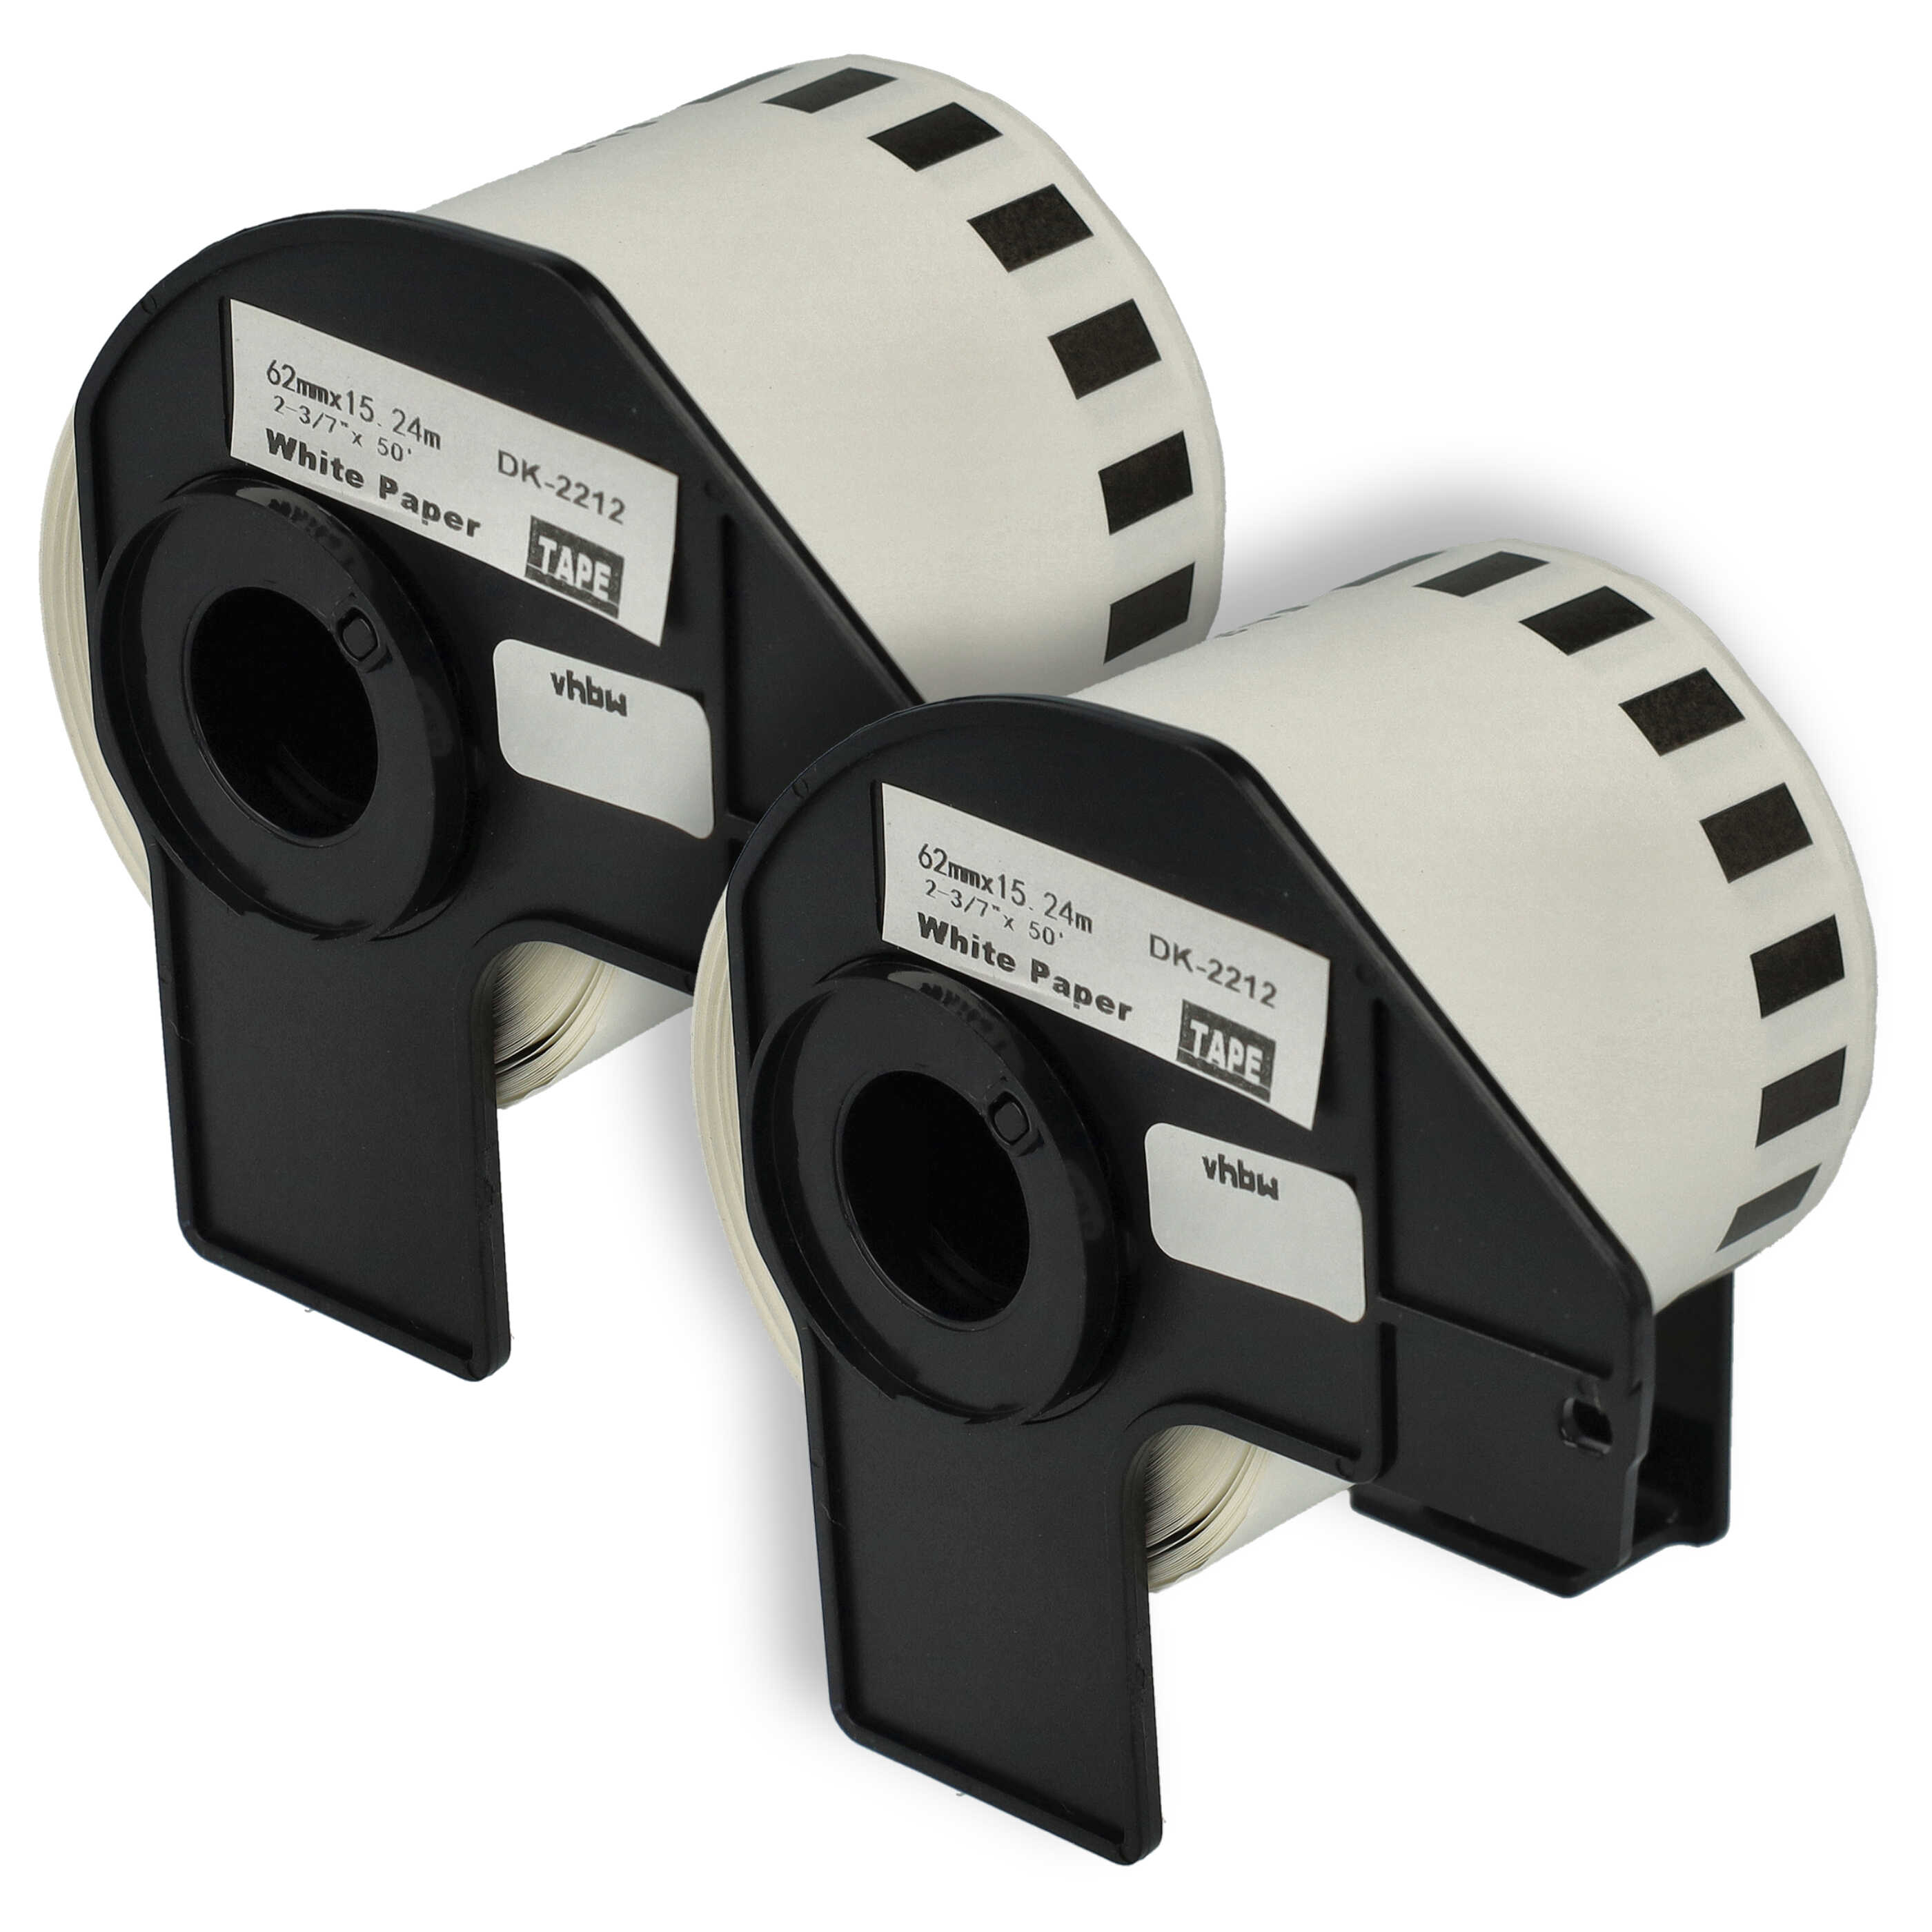 2x Labels replaces Brother DK-22212 for Labeller - 62 mm x 15.24m + Holder